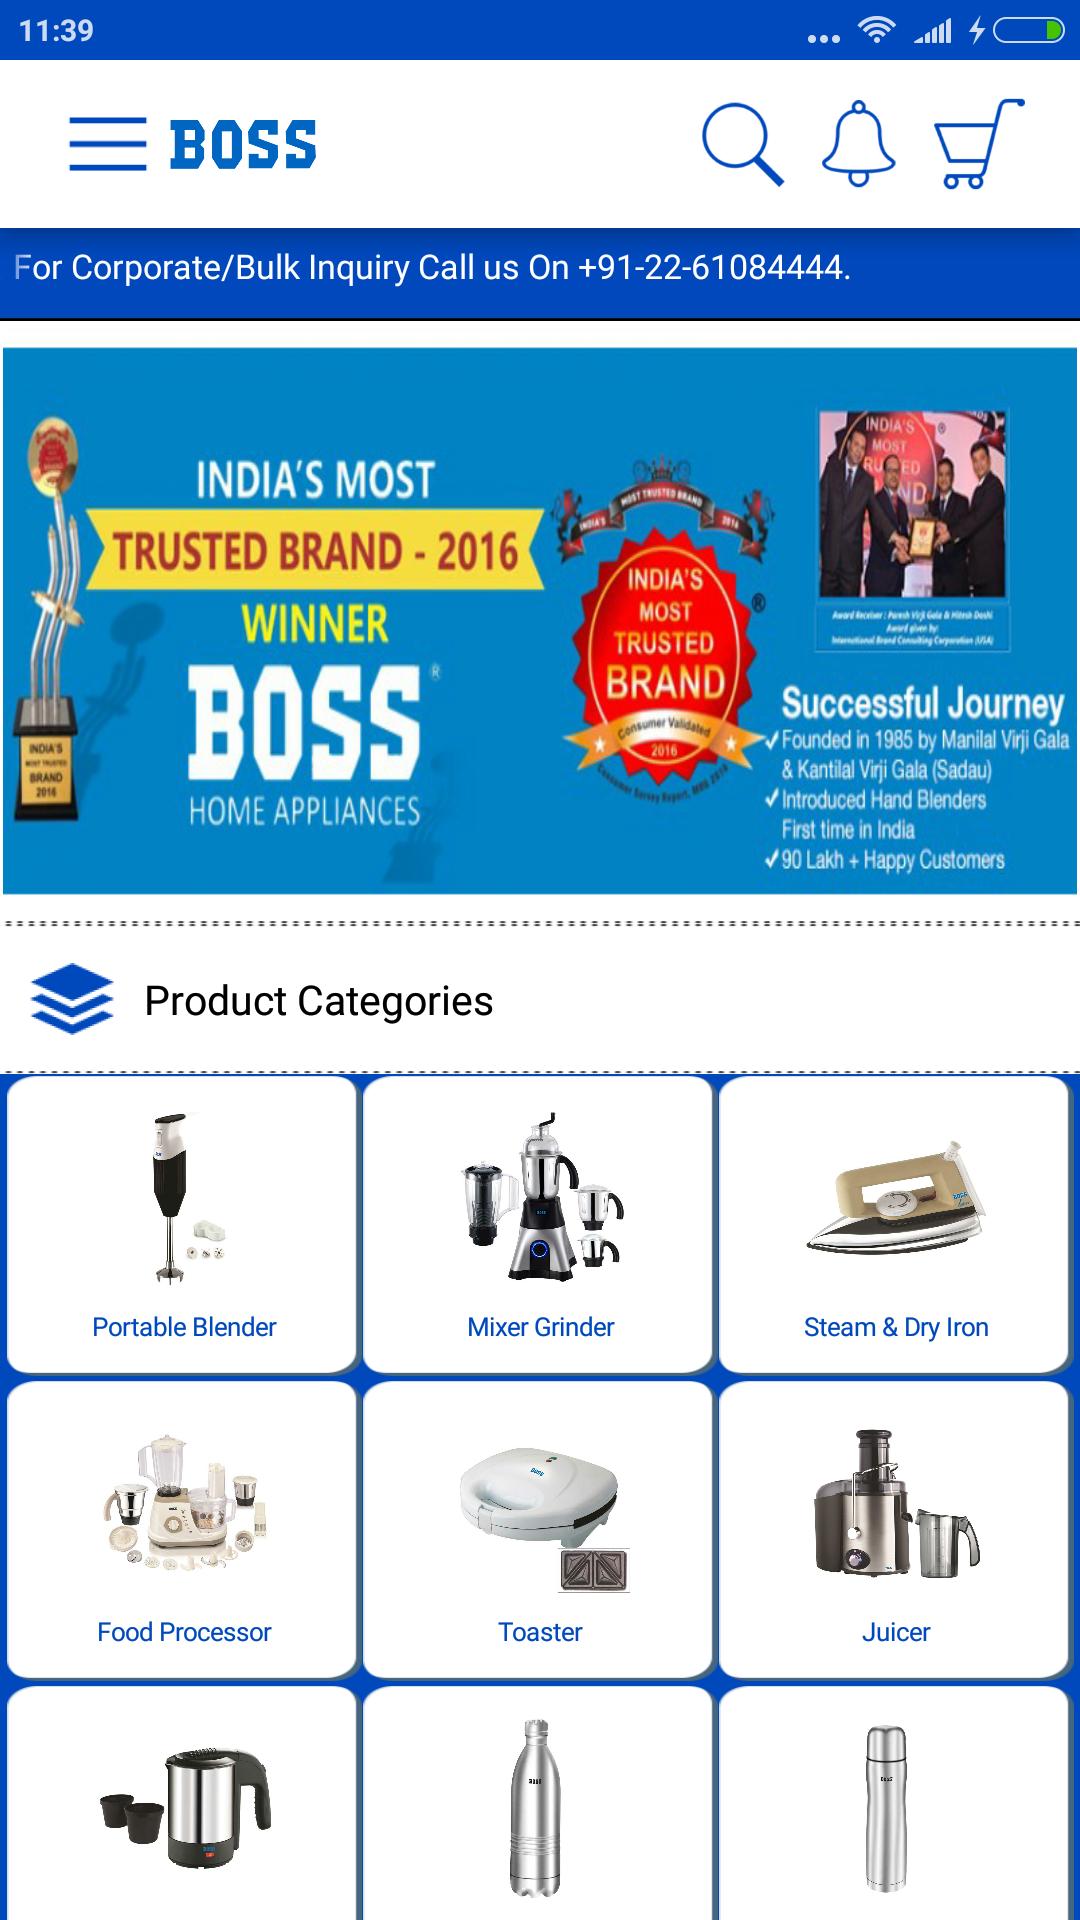 BOSS Home Appliances for Android - APK Download